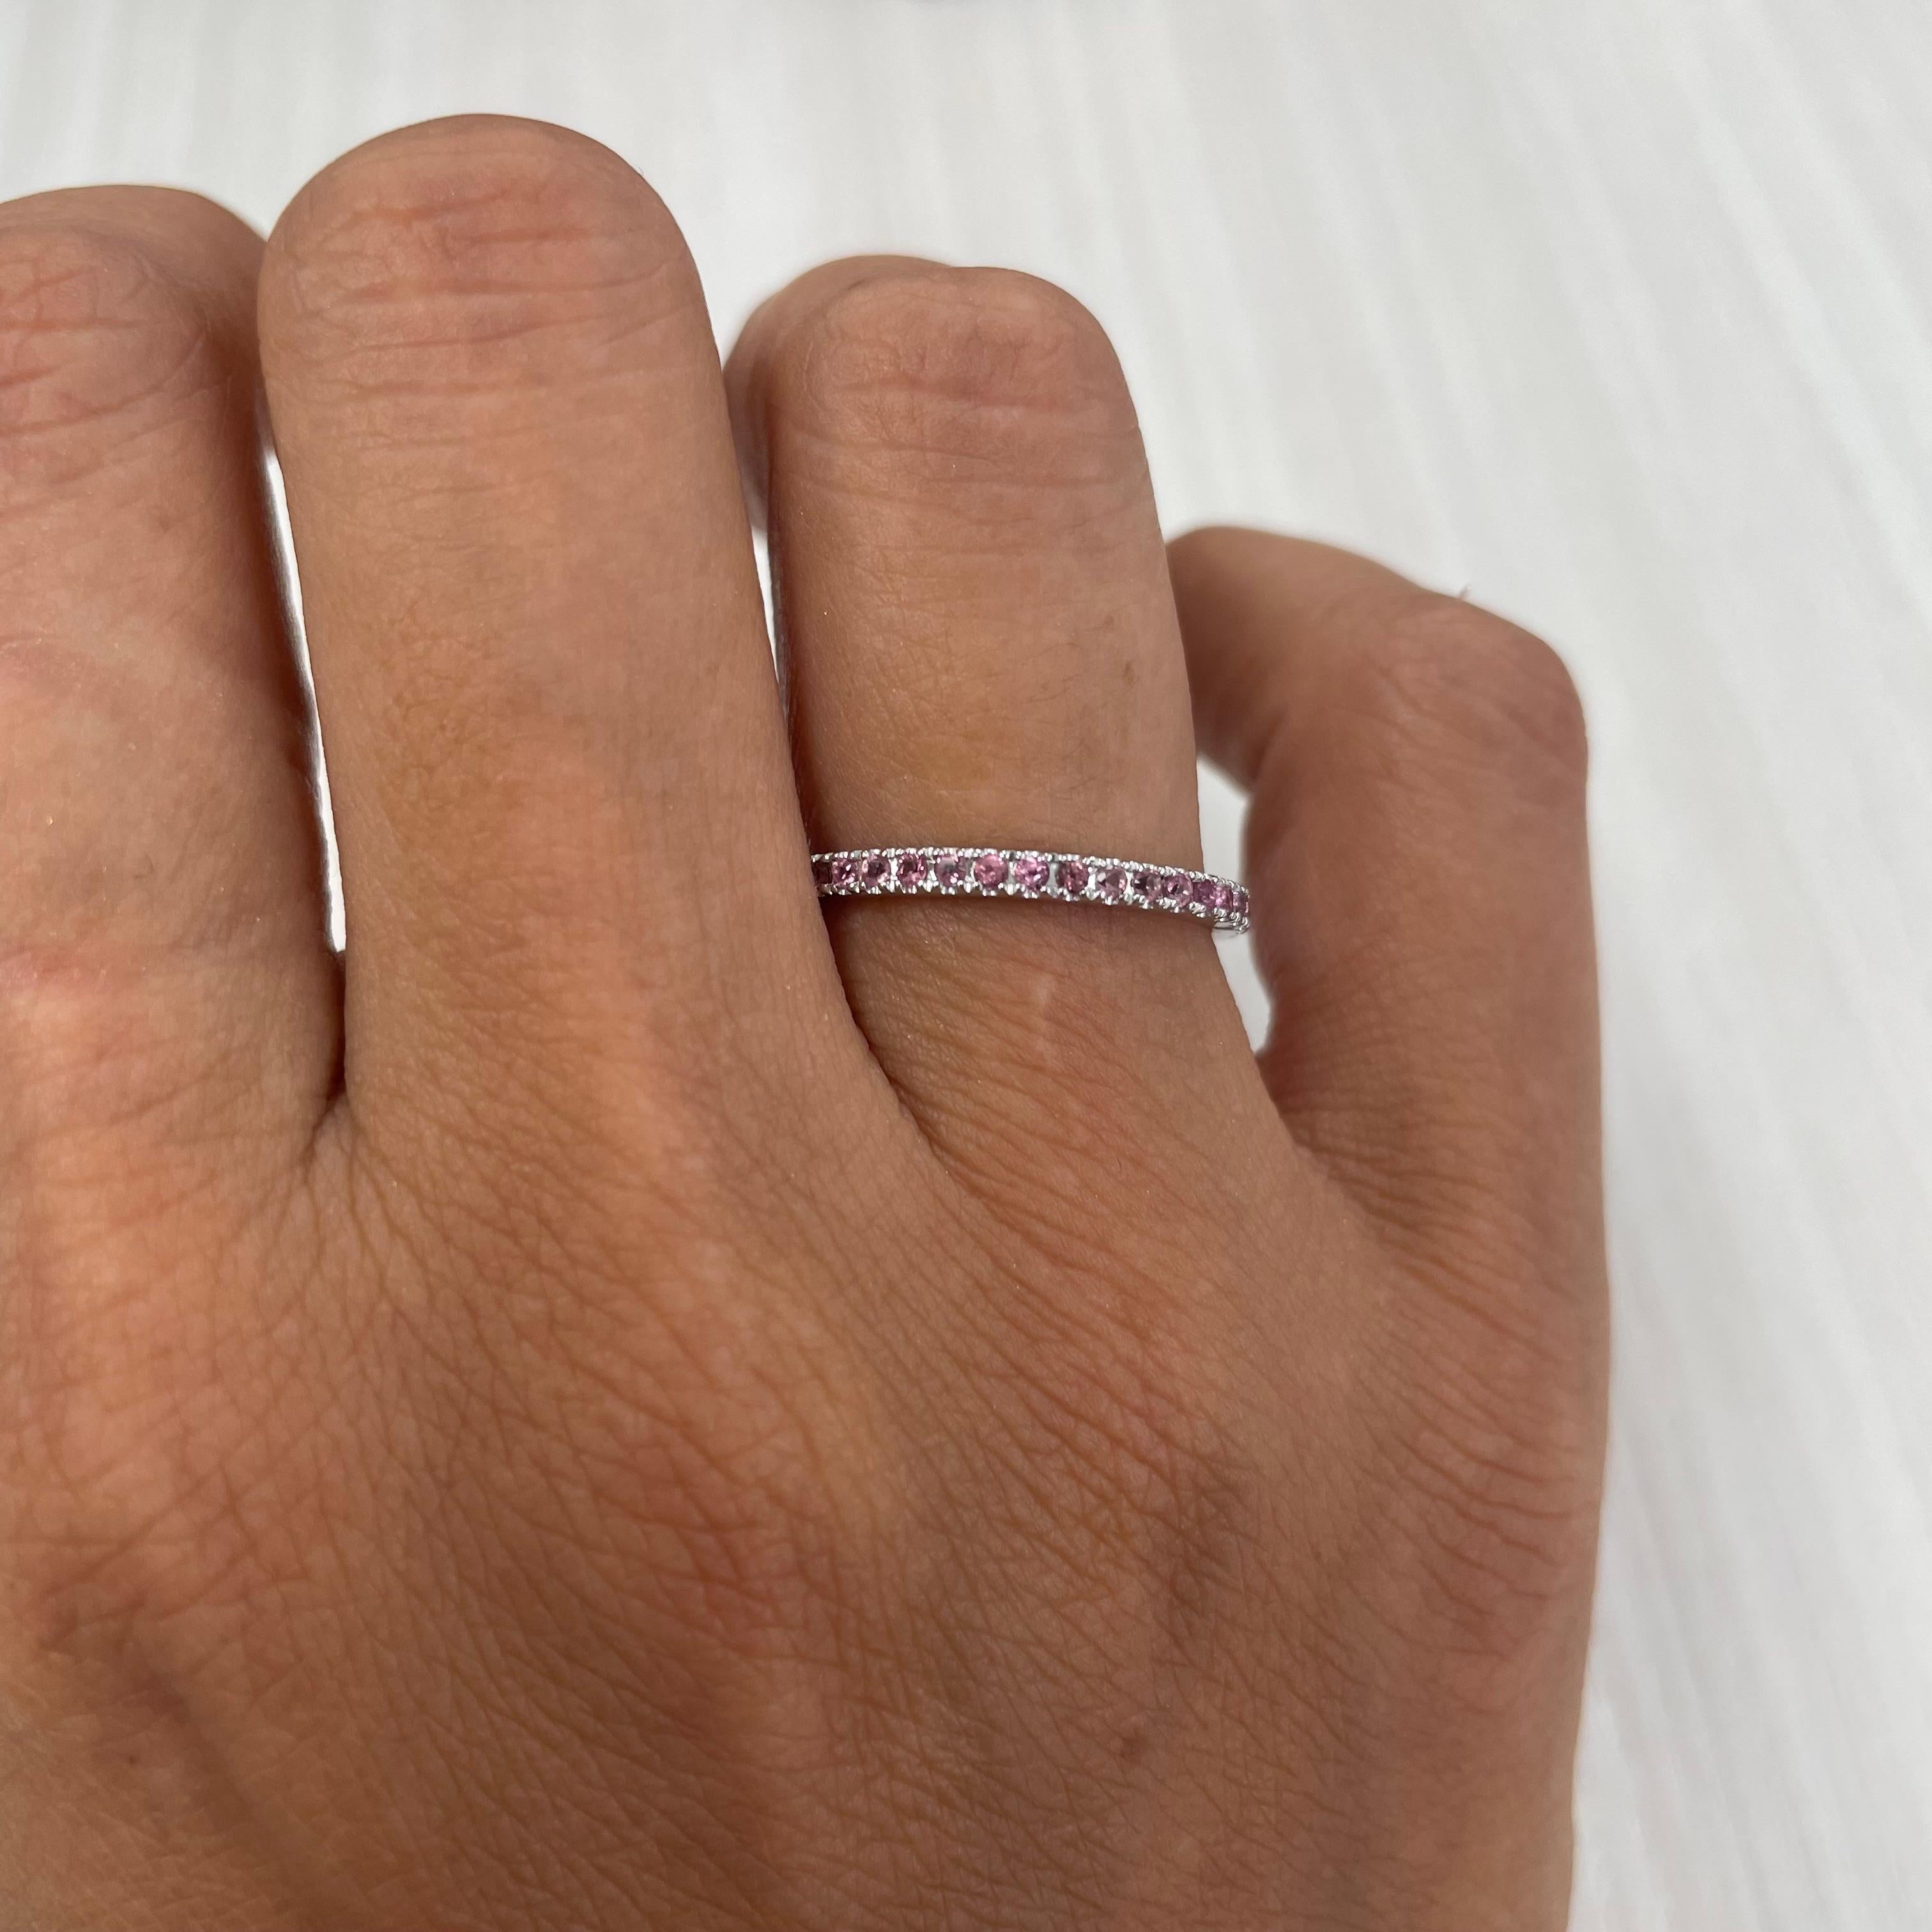 Charming Design - This stackable half-way around band is made of 14K gold and features round Pink Tourmoline approximately 0.17cts, available in  white, yellow and rose gold
 Measurements for ring size: The finger Size of this sapphire ring is 6.5